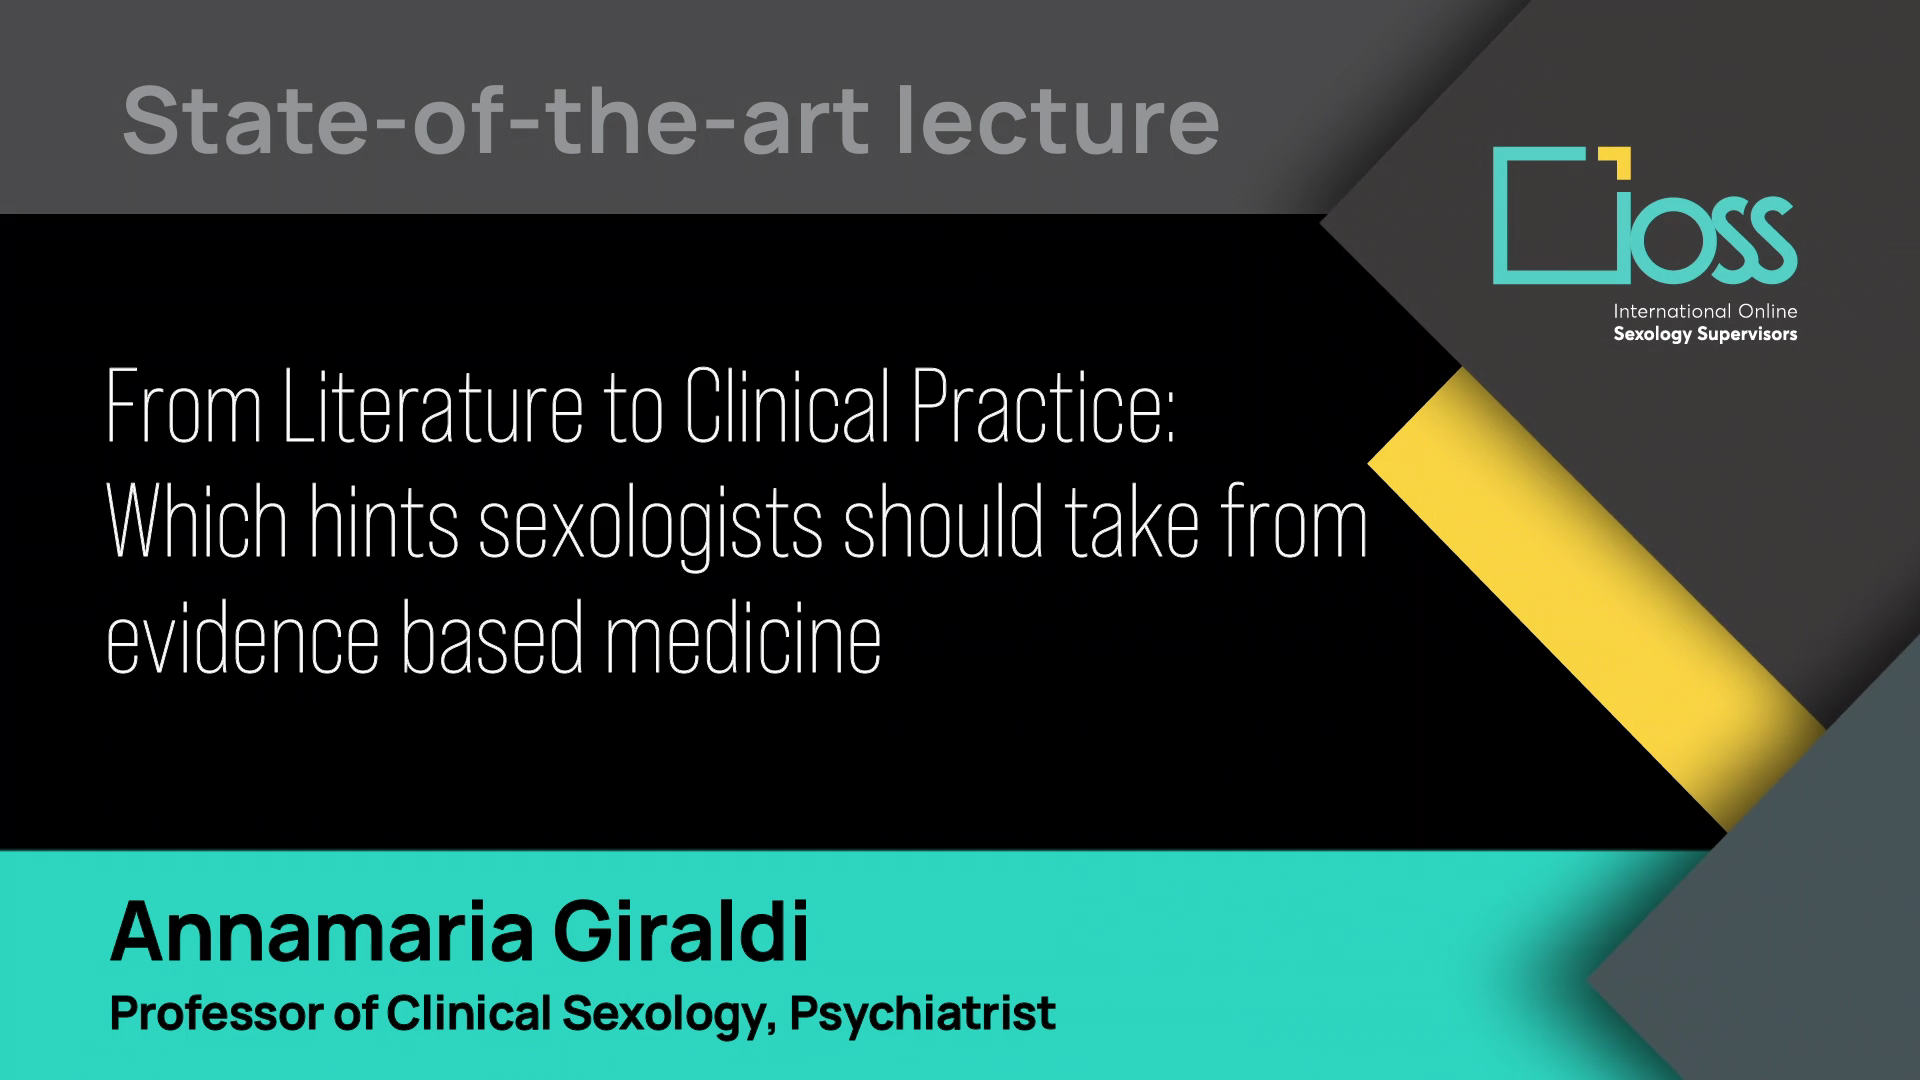 Full Video From Literature to Clinical Practice: Which hints should sexologists take from evidence based medicine